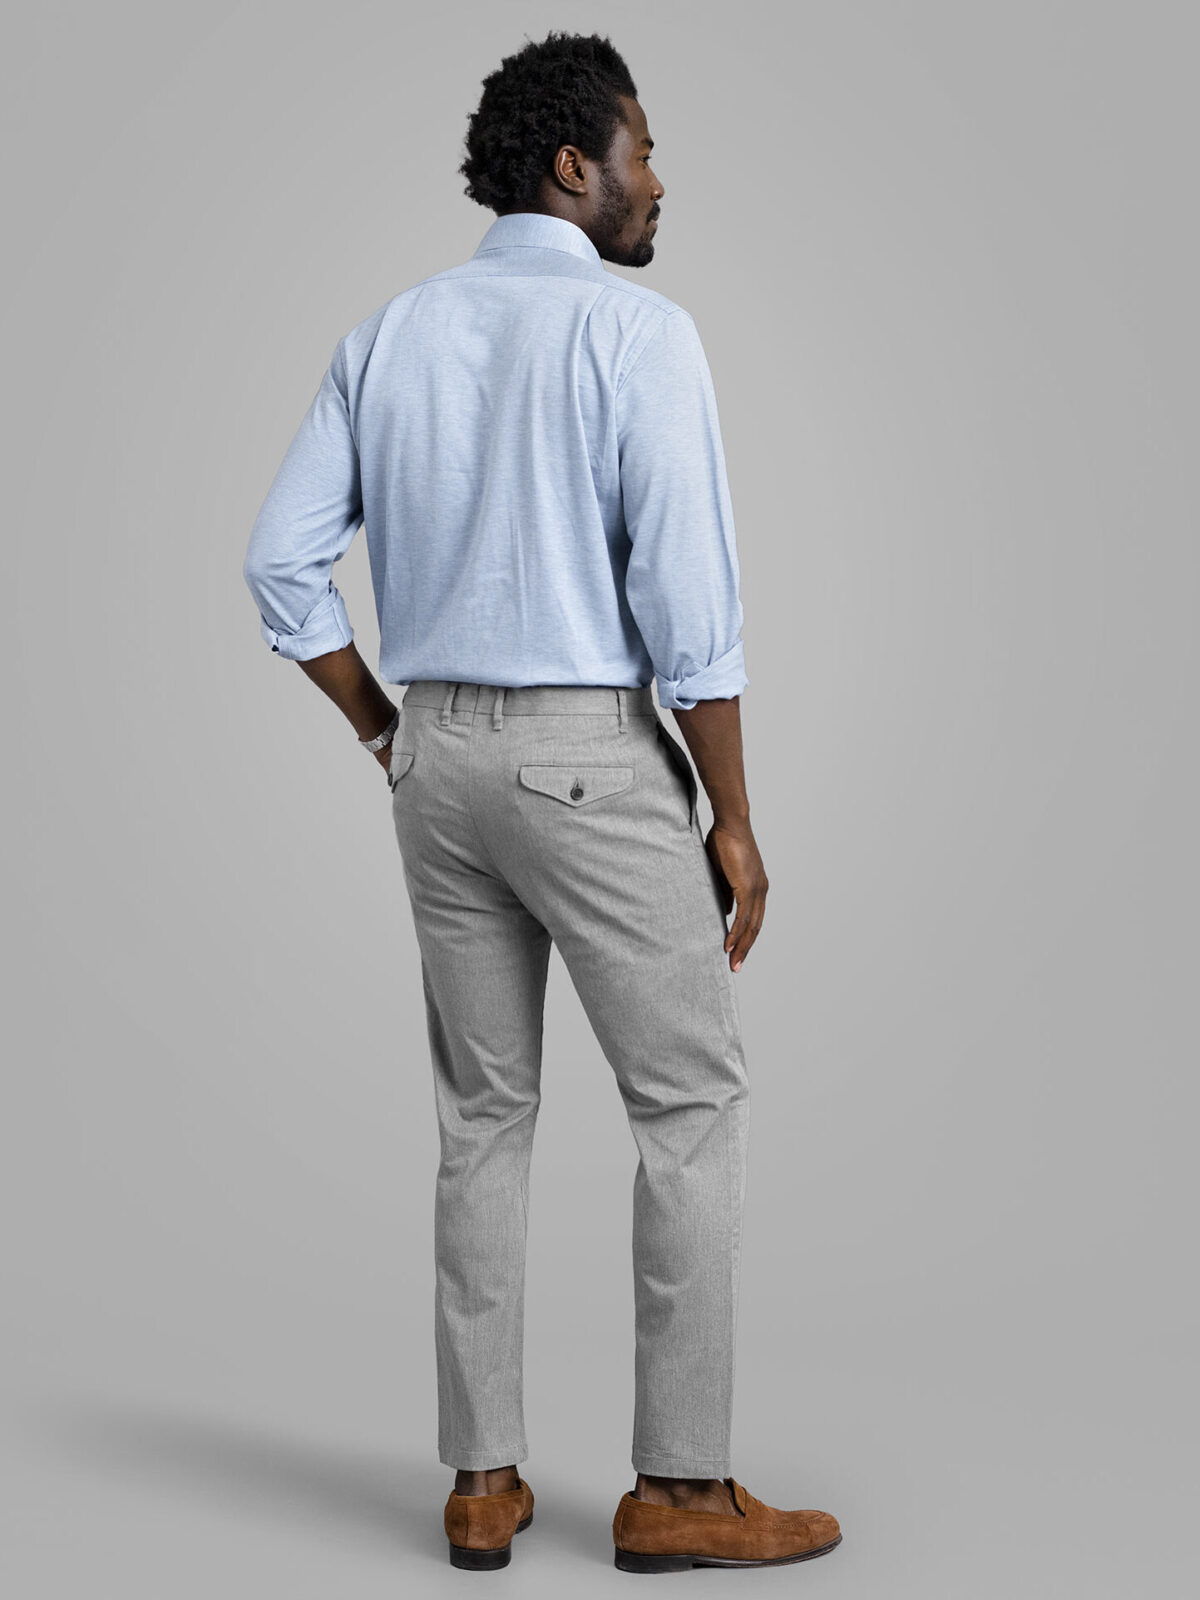 what to wear with light blue chinos men